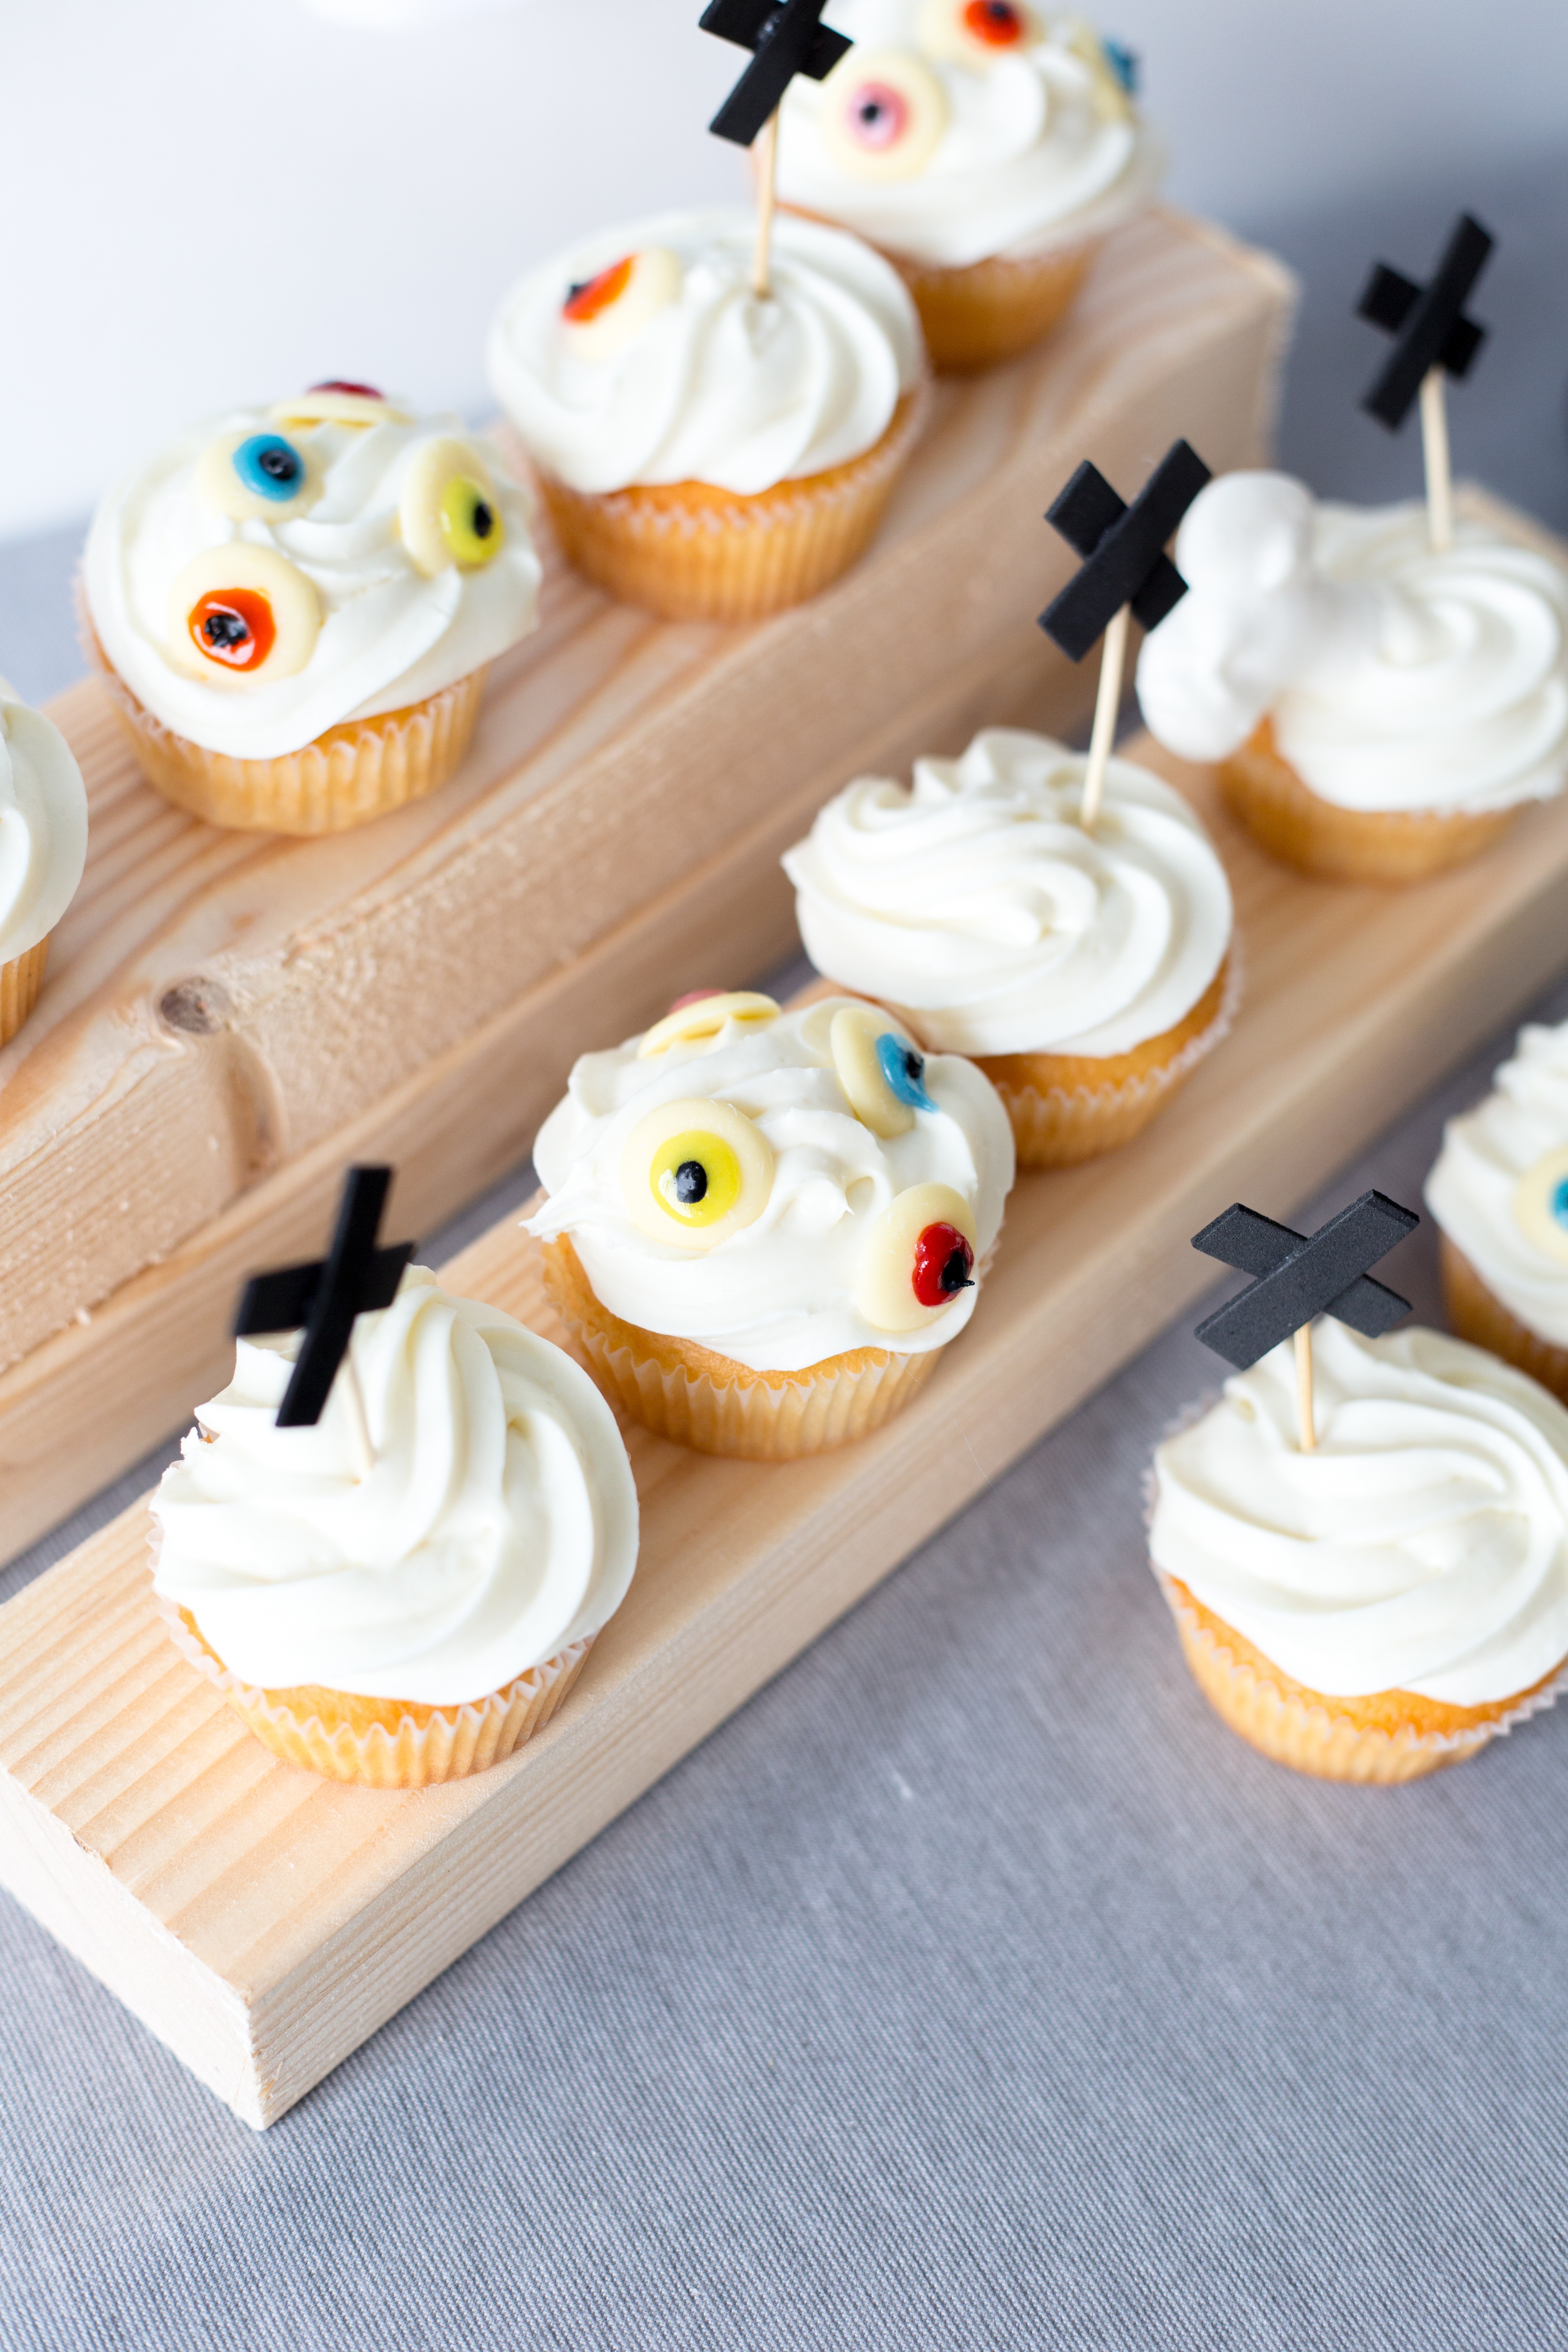 10 Super Quick and Easy Last Minute Halloween Party Ideas